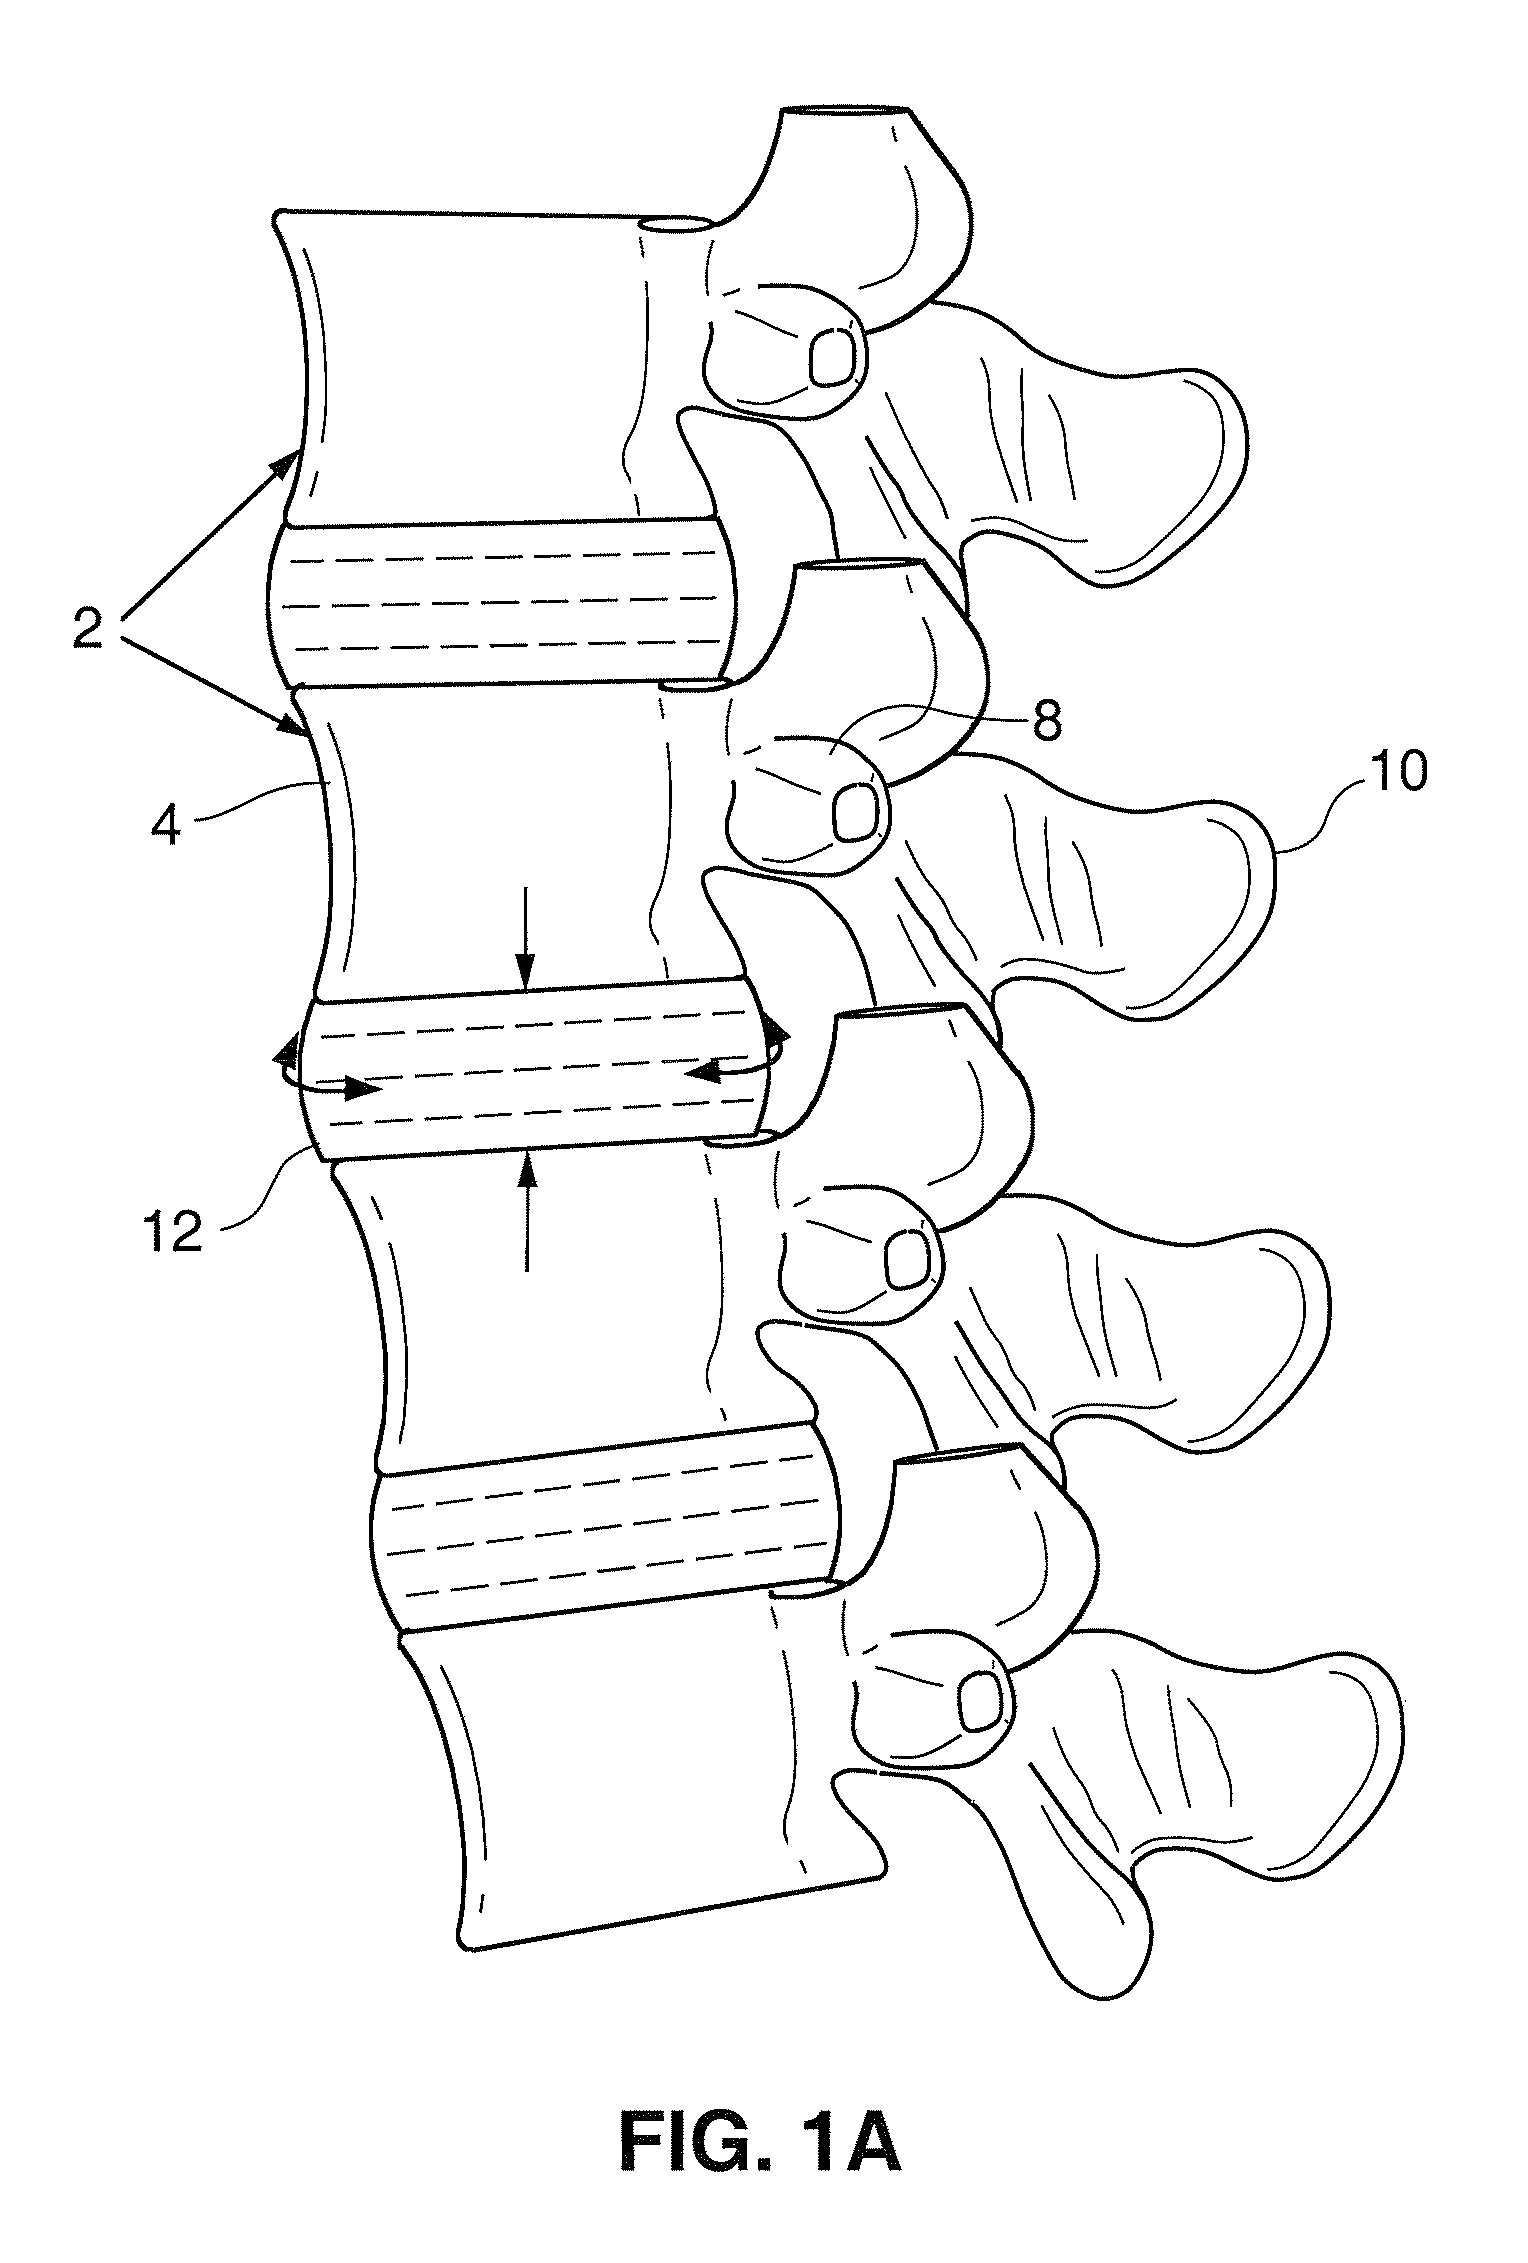 Spinal implant and method for restricting spinal flexion